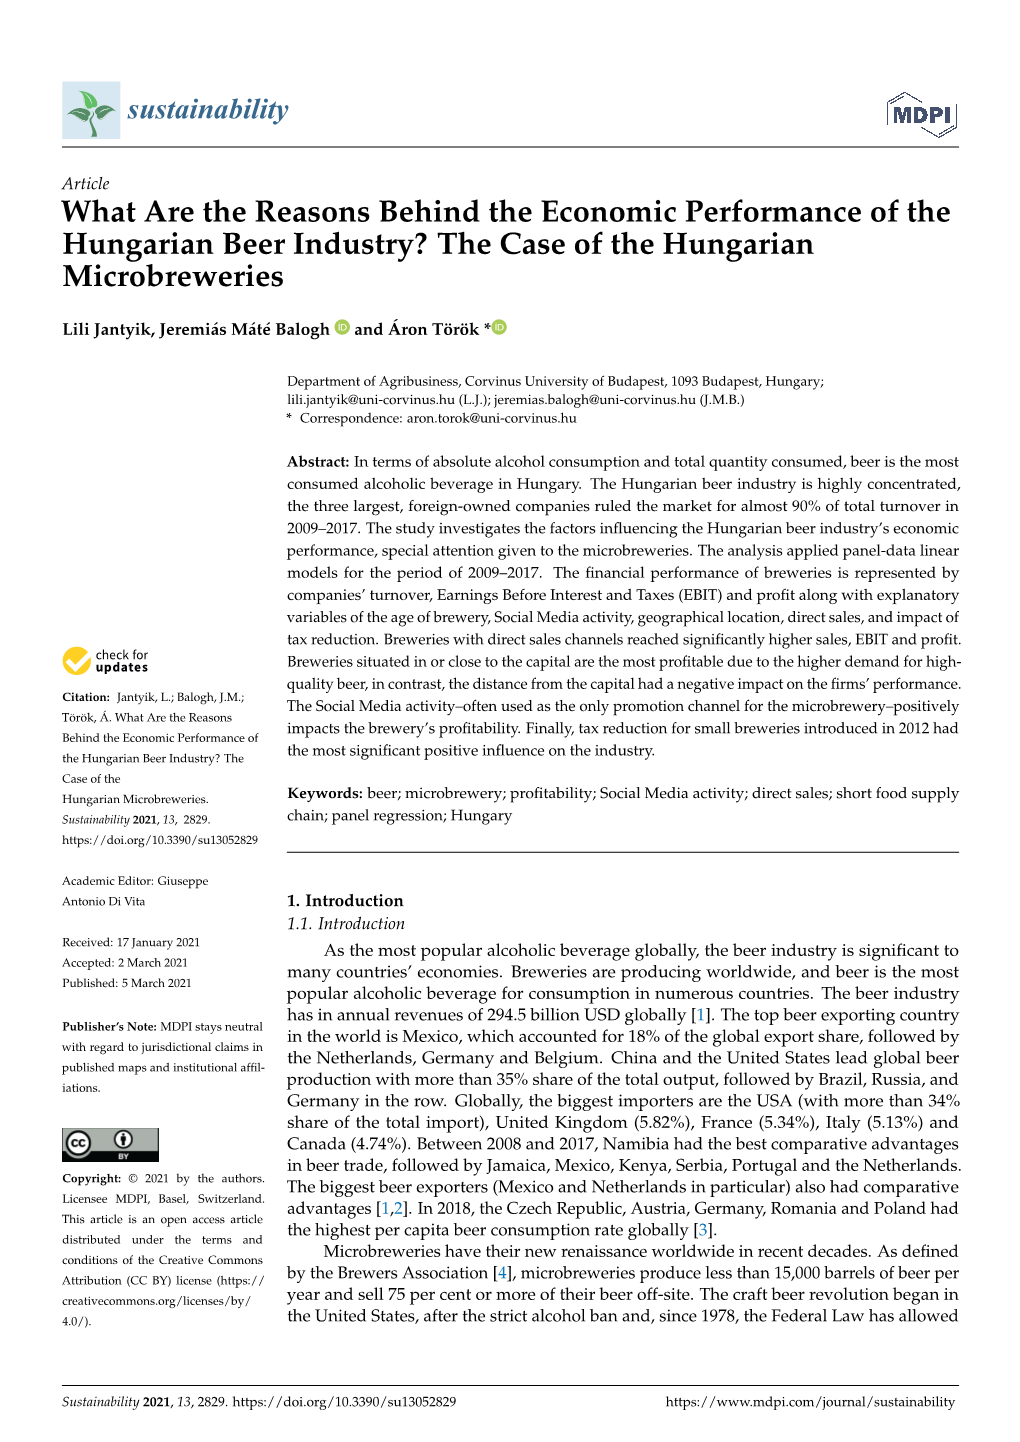 What Are the Reasons Behind the Economic Performance of the Hungarian Beer Industry? the Case of the Hungarian Microbreweries